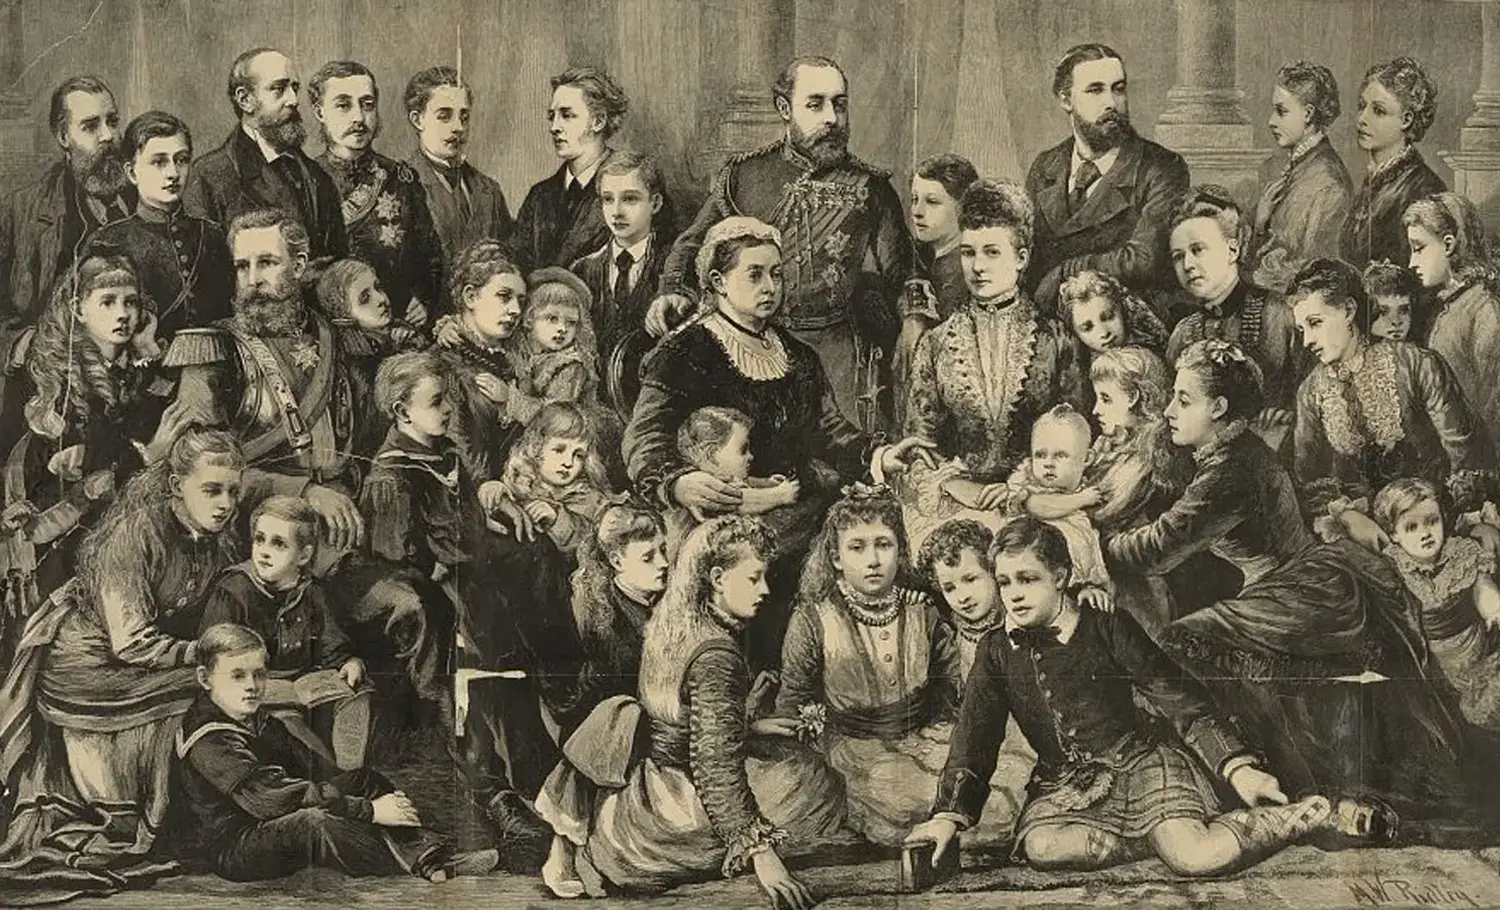 Queen Victoria surrounded by at least 24 children of different ages. Some adults are standing in the background and seated at the periphery.